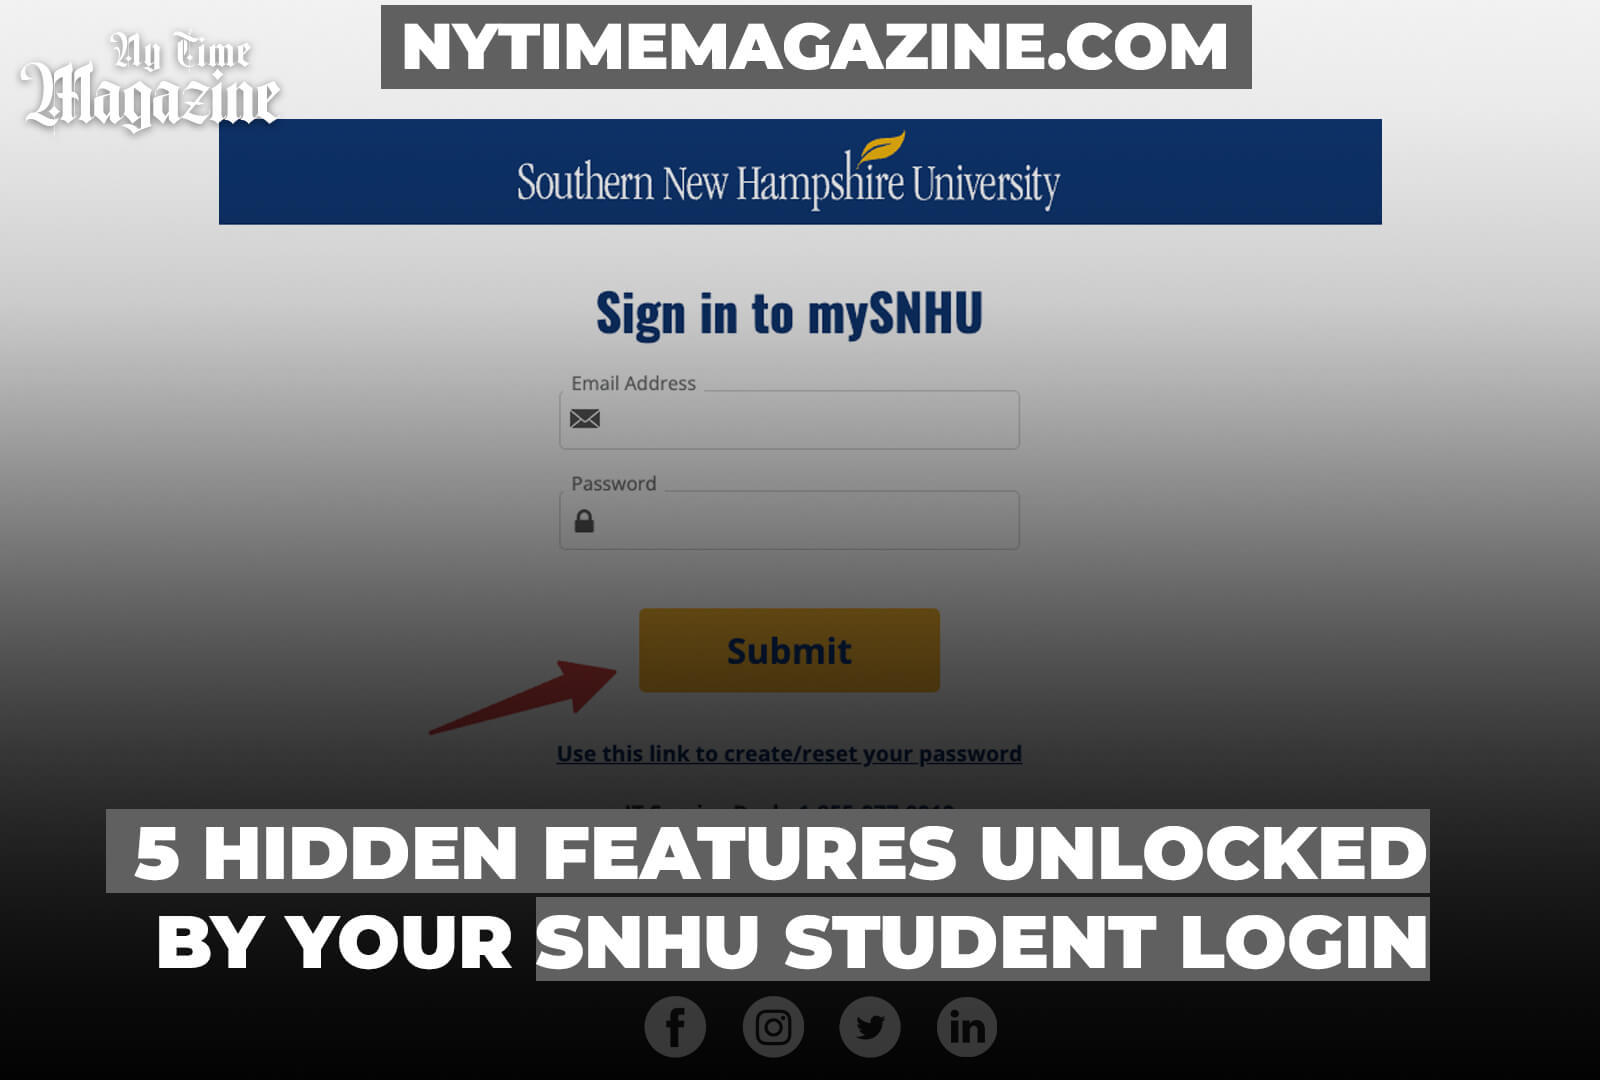 5 HIDDEN FEATURES UNLOCKED BY YOUR SNHU STUDENT LOGIN